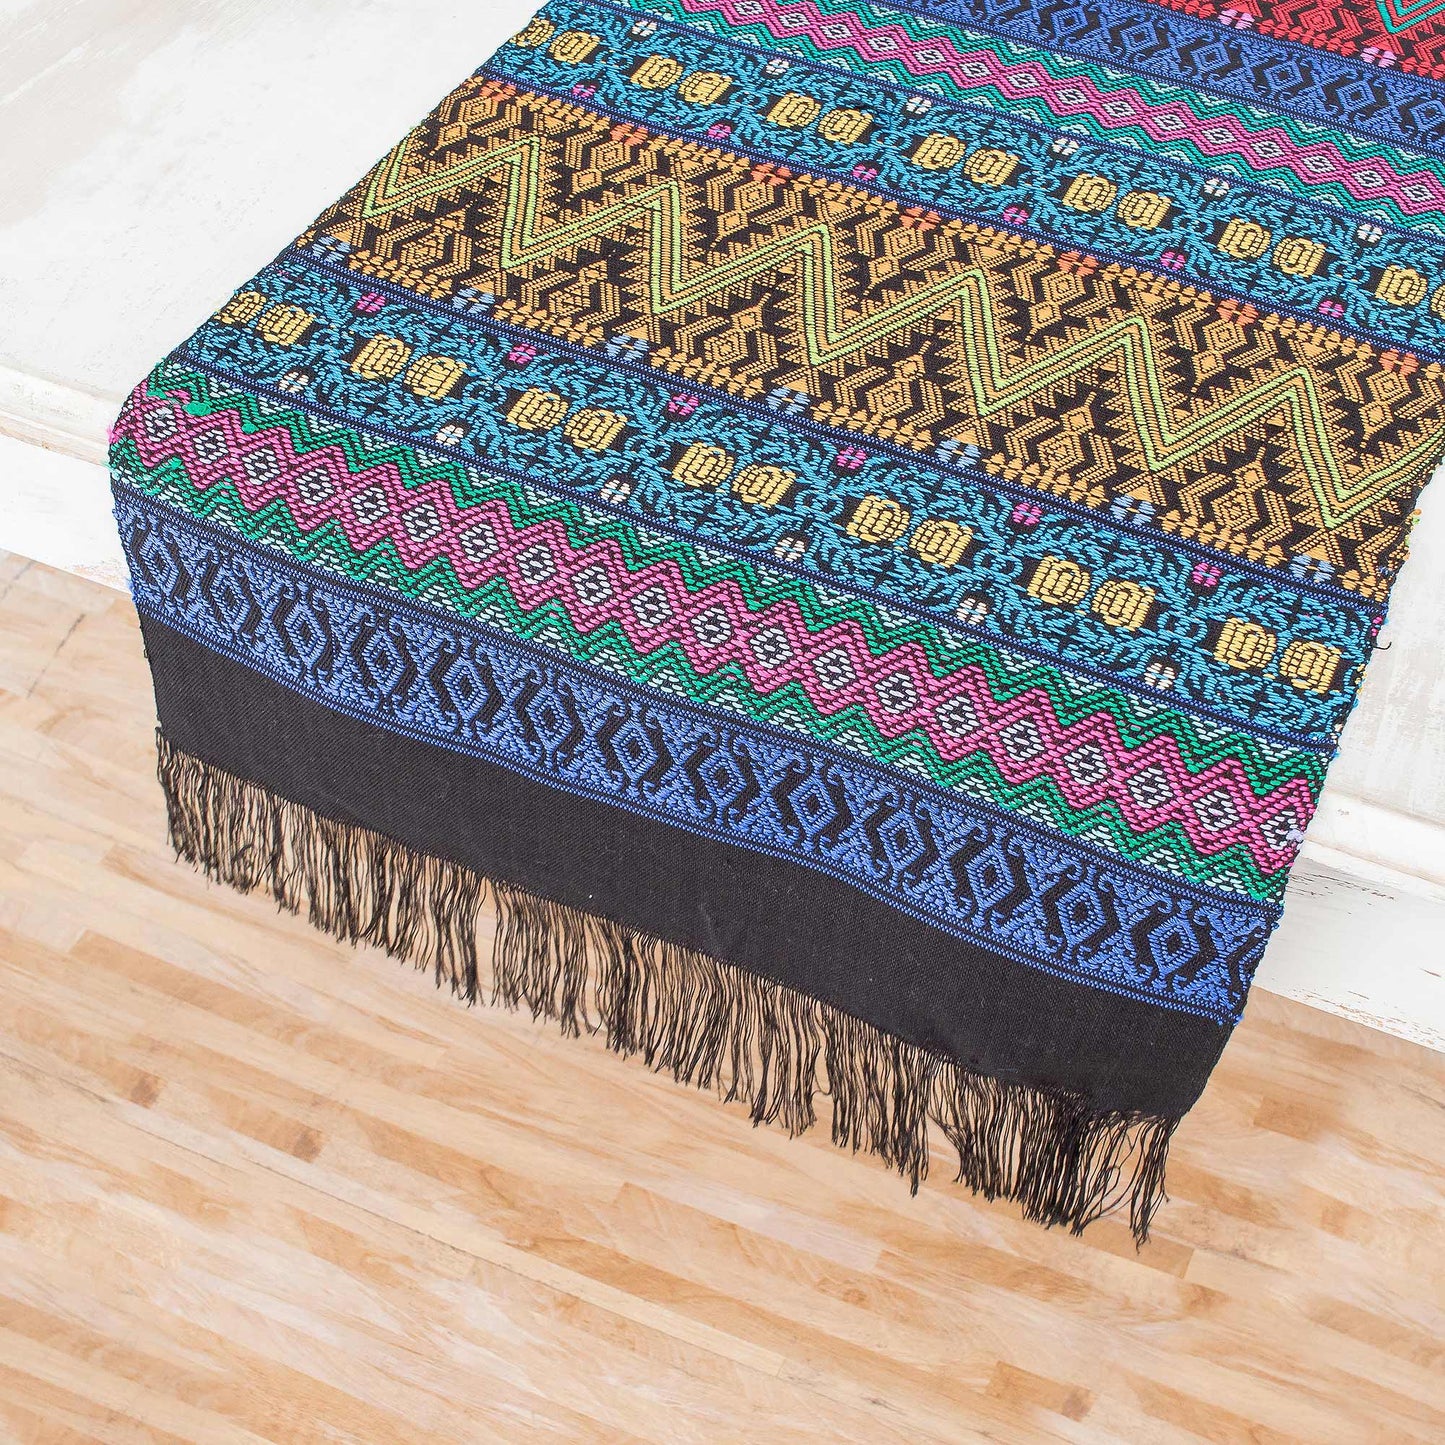 Bright Night Handwoven Cotton Table Runner with Zigzag Patterns